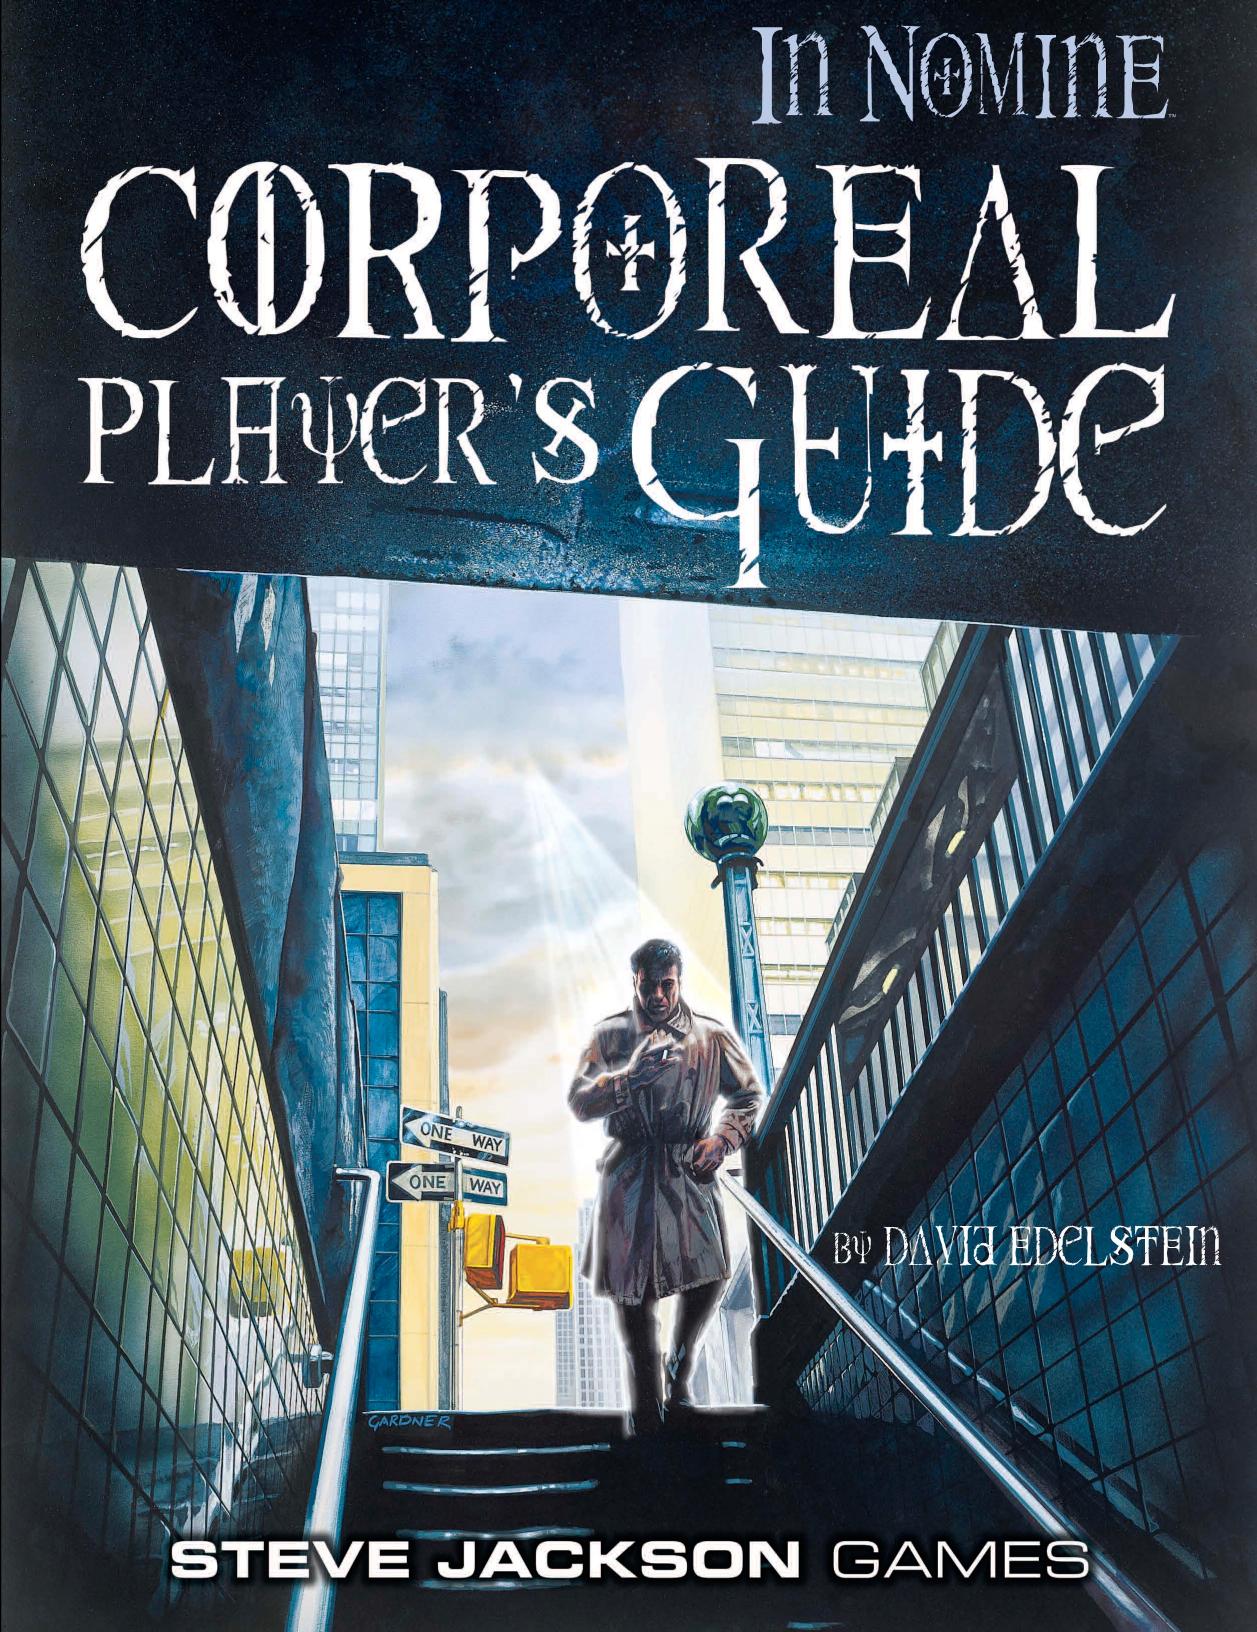 In Nomine: Corporeal Player's Guide